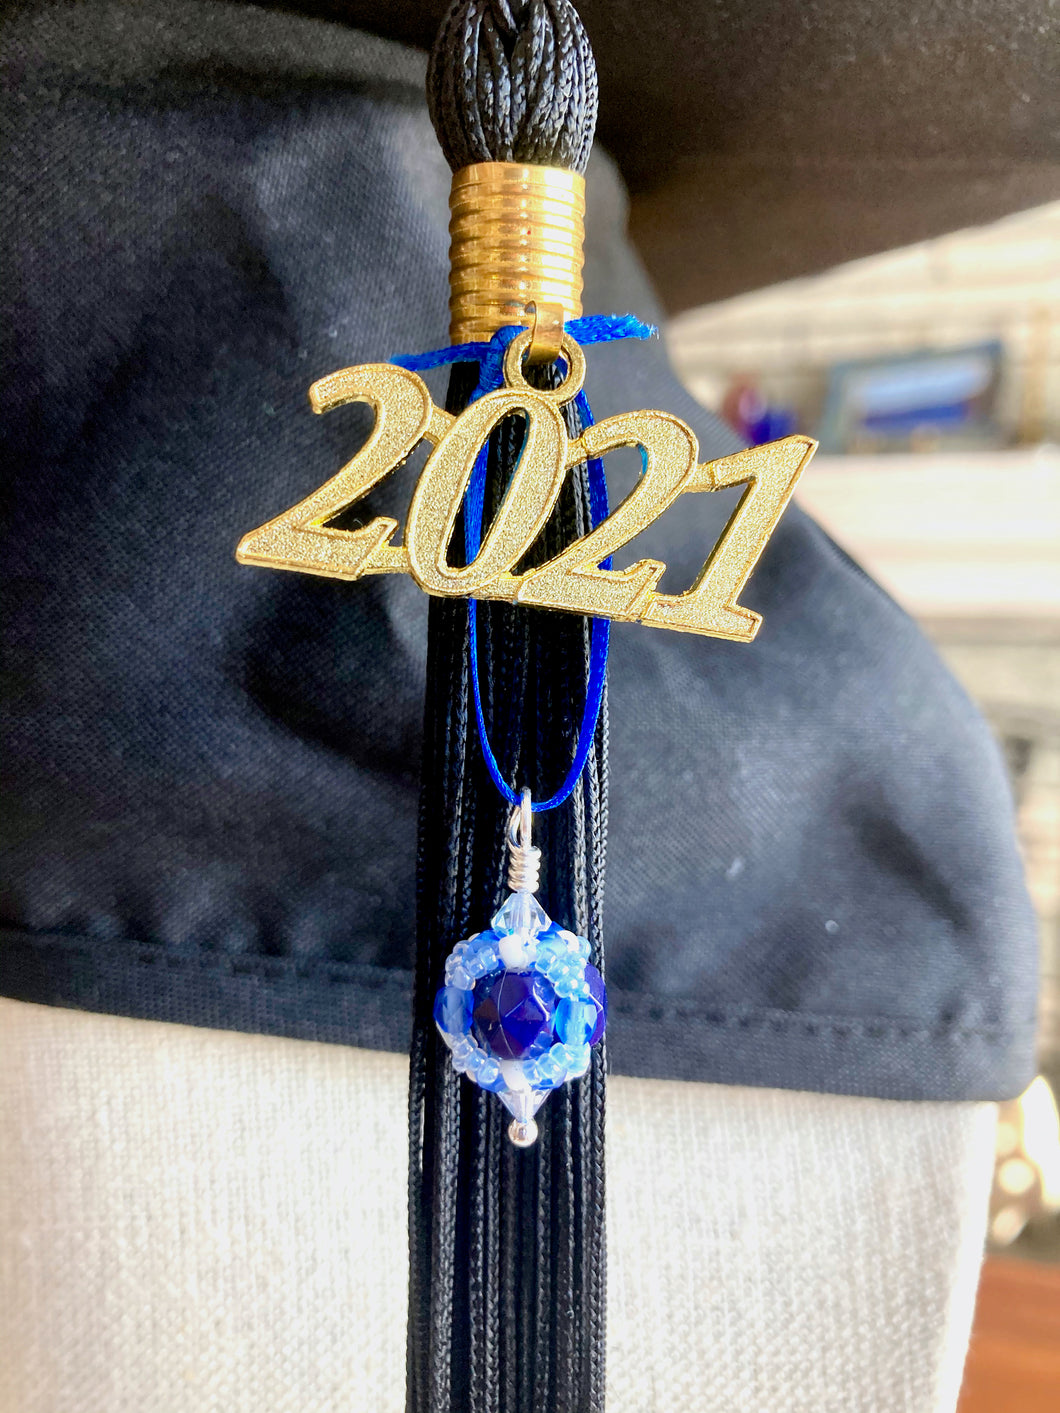 University of Maine Gifts -- Handcrafted Crystal & Glass Proud of U.™ Graduation Cap Tassel Charm